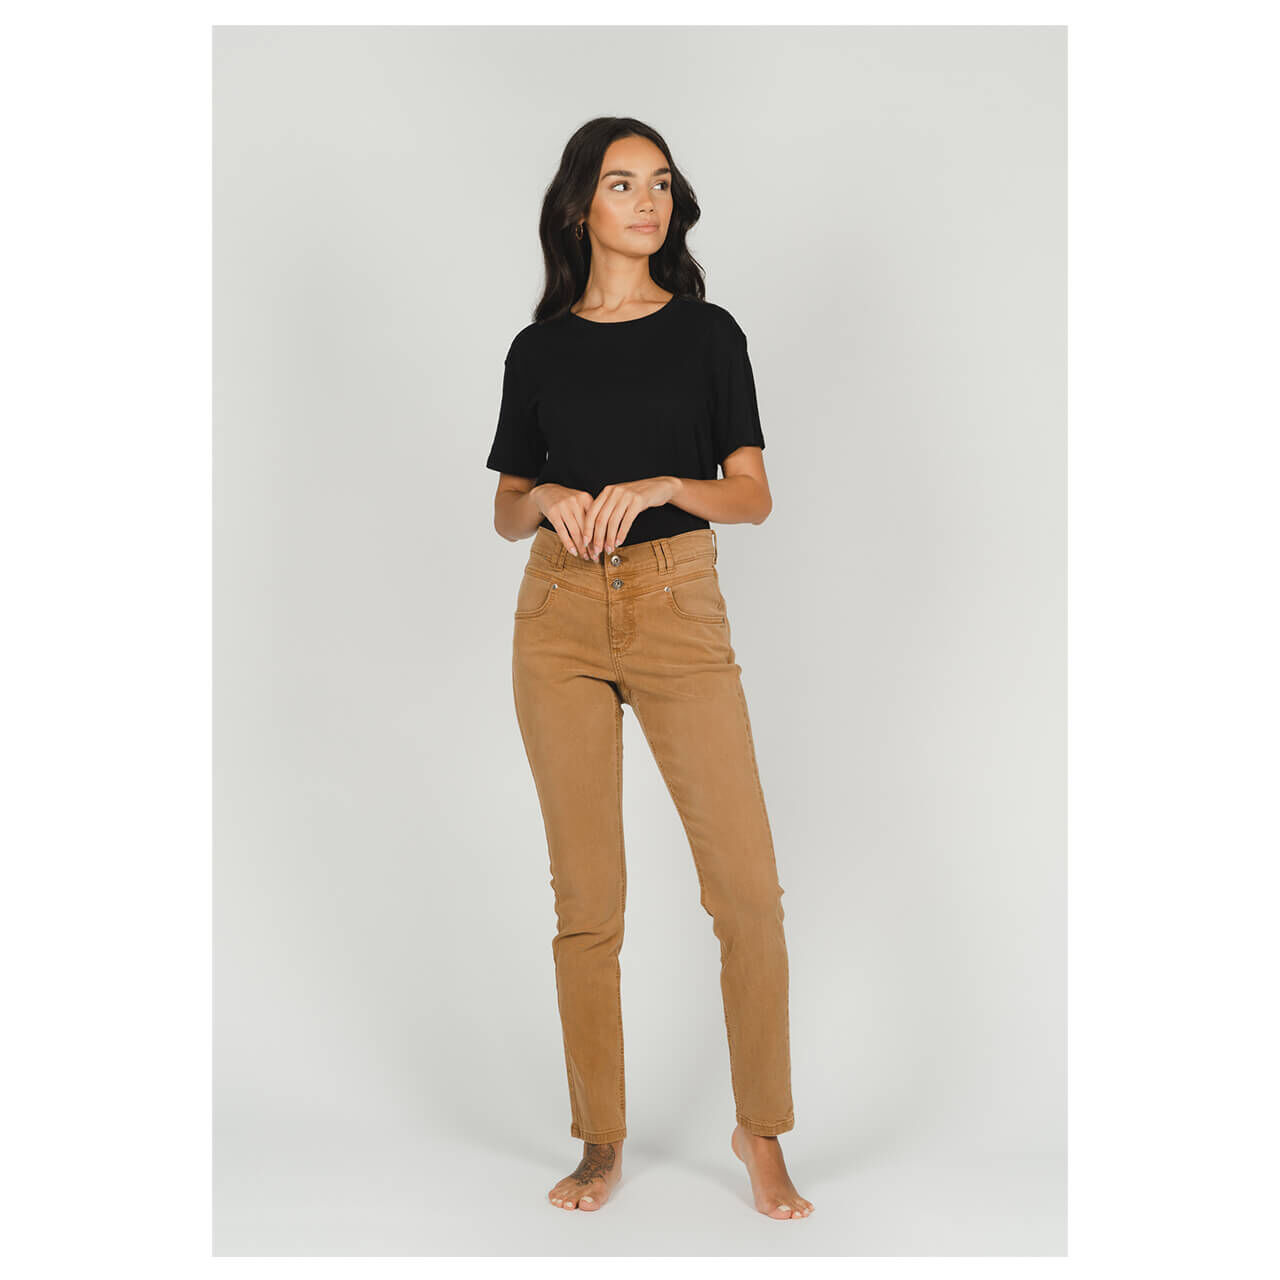 Angels Skinny Button Jeans dark camel used